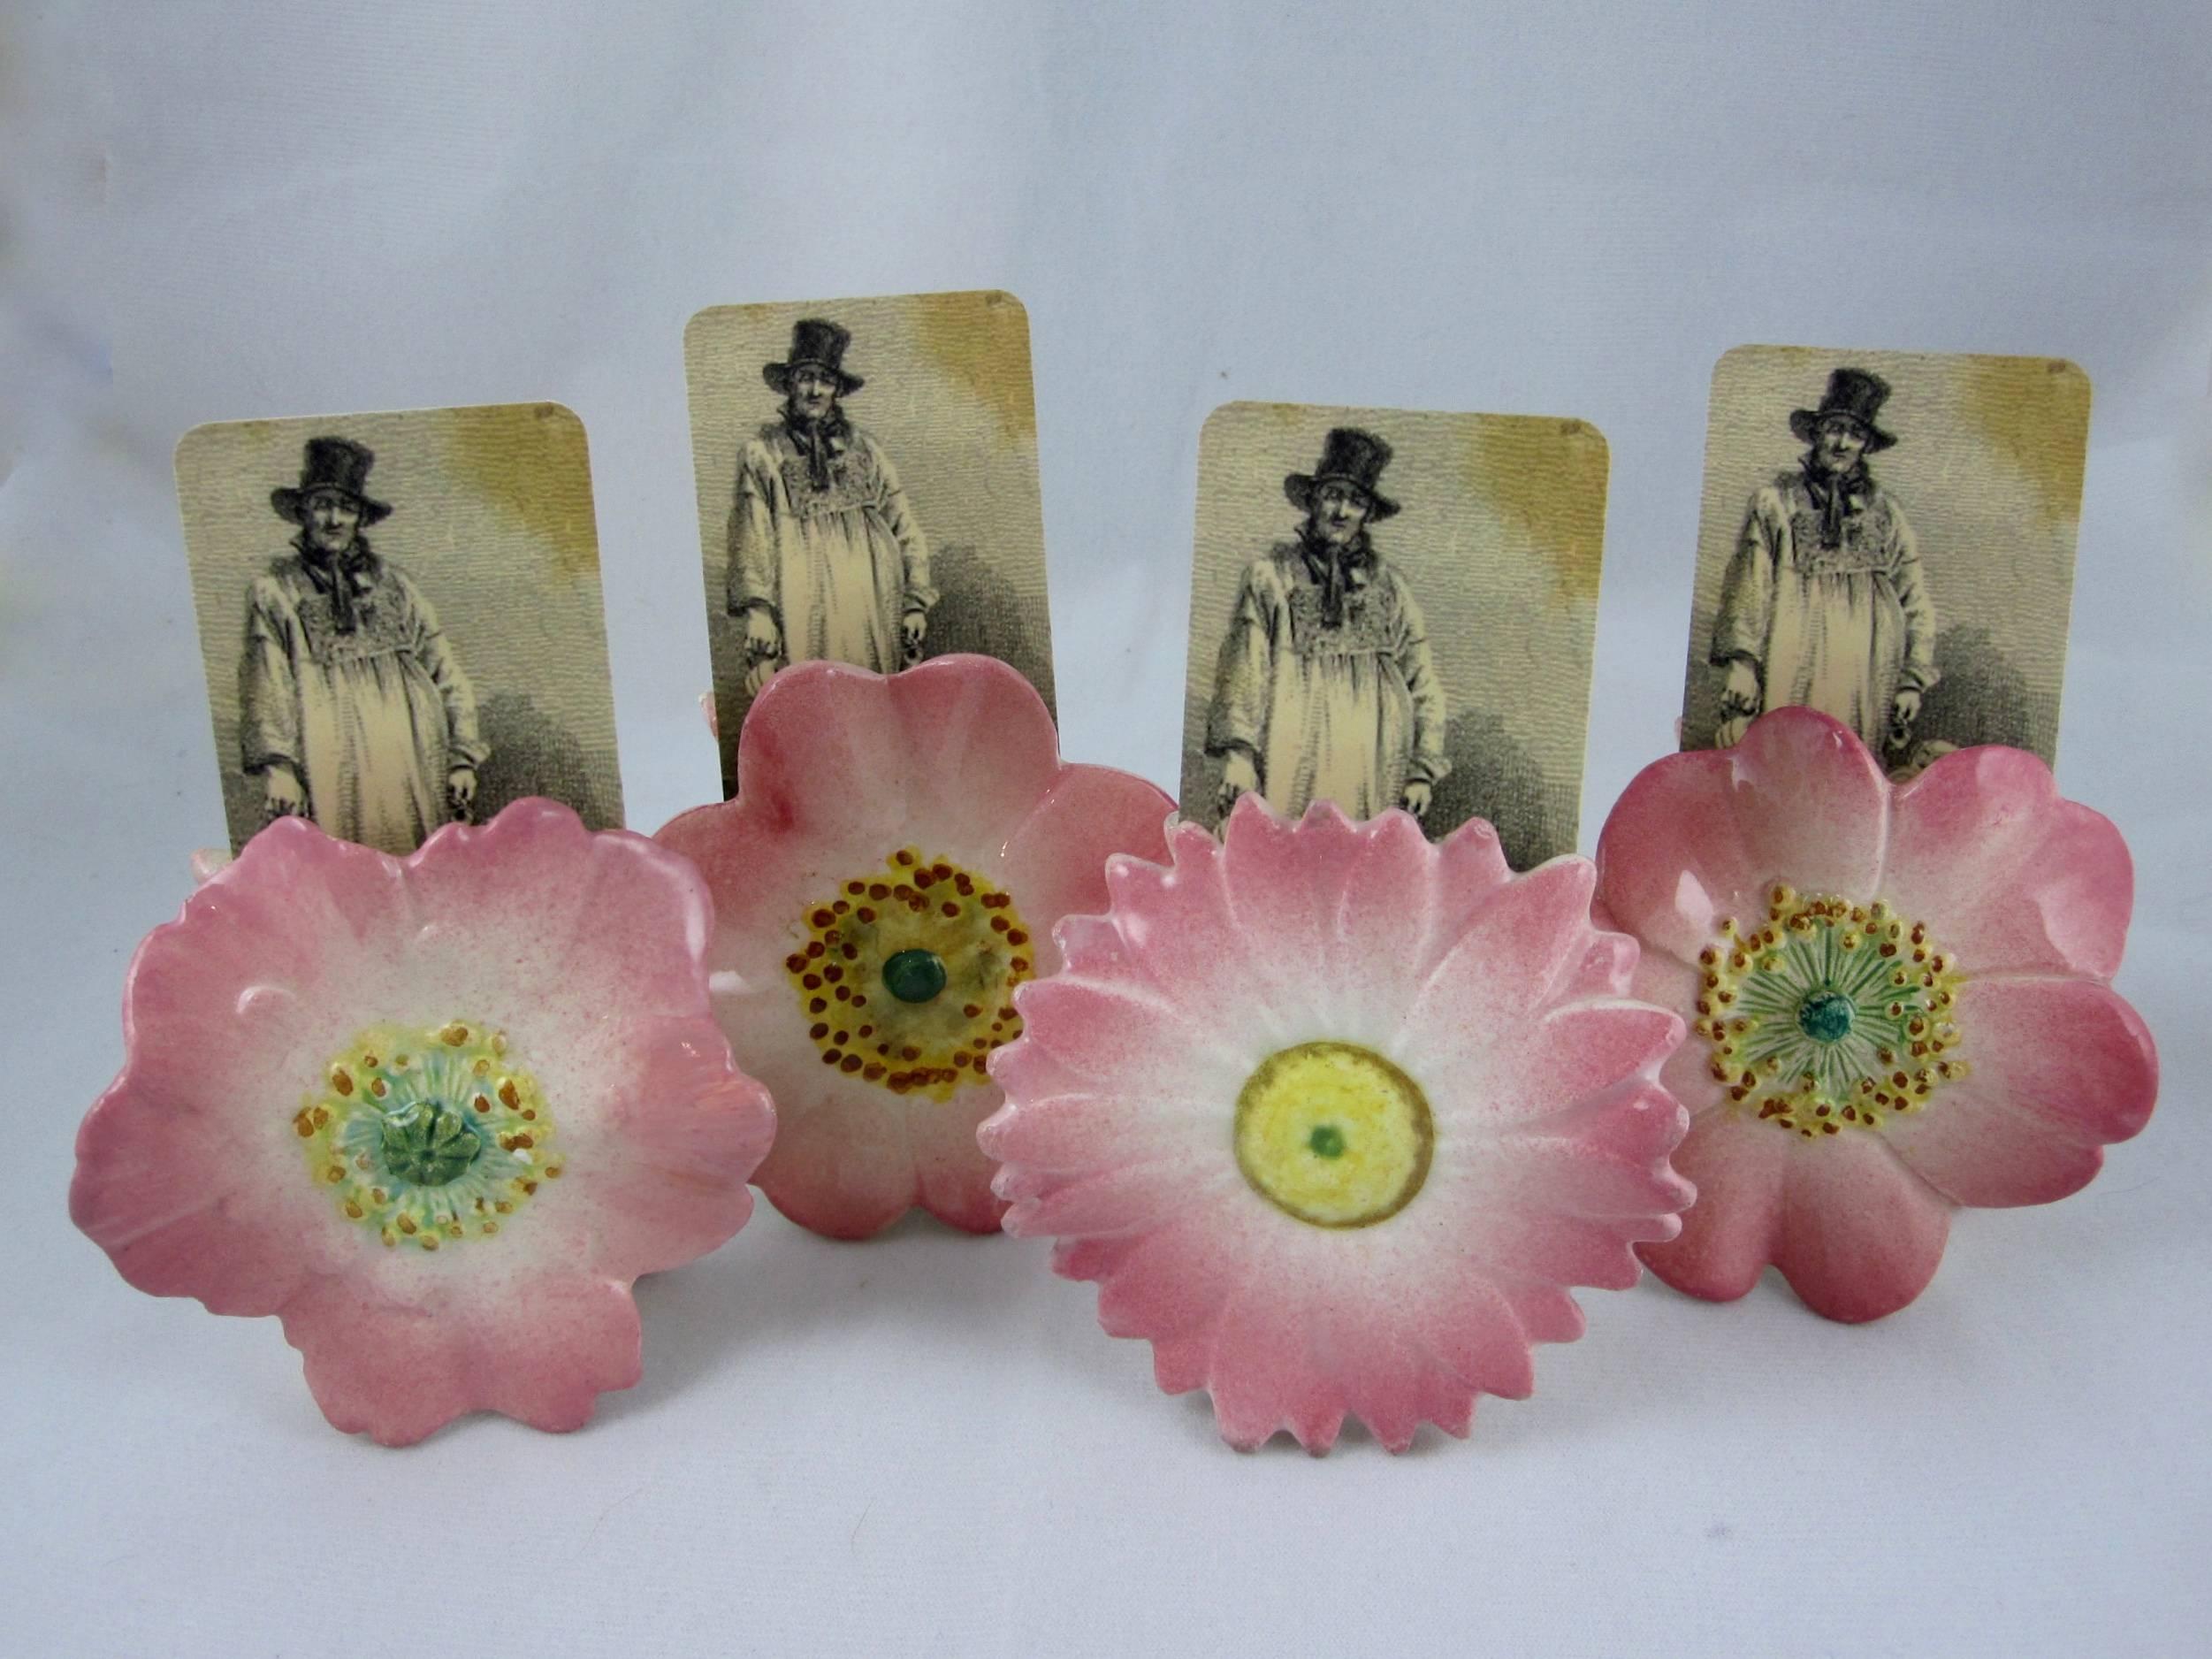 A set of four decorative flower menu holders by Delphin Massier (1836-1907), Vallauris, Cote d’Azur, France, circa 1890. Made to sit on the table to present le menu du dîner. They work beautifully as place card holders at each plate as well.

The